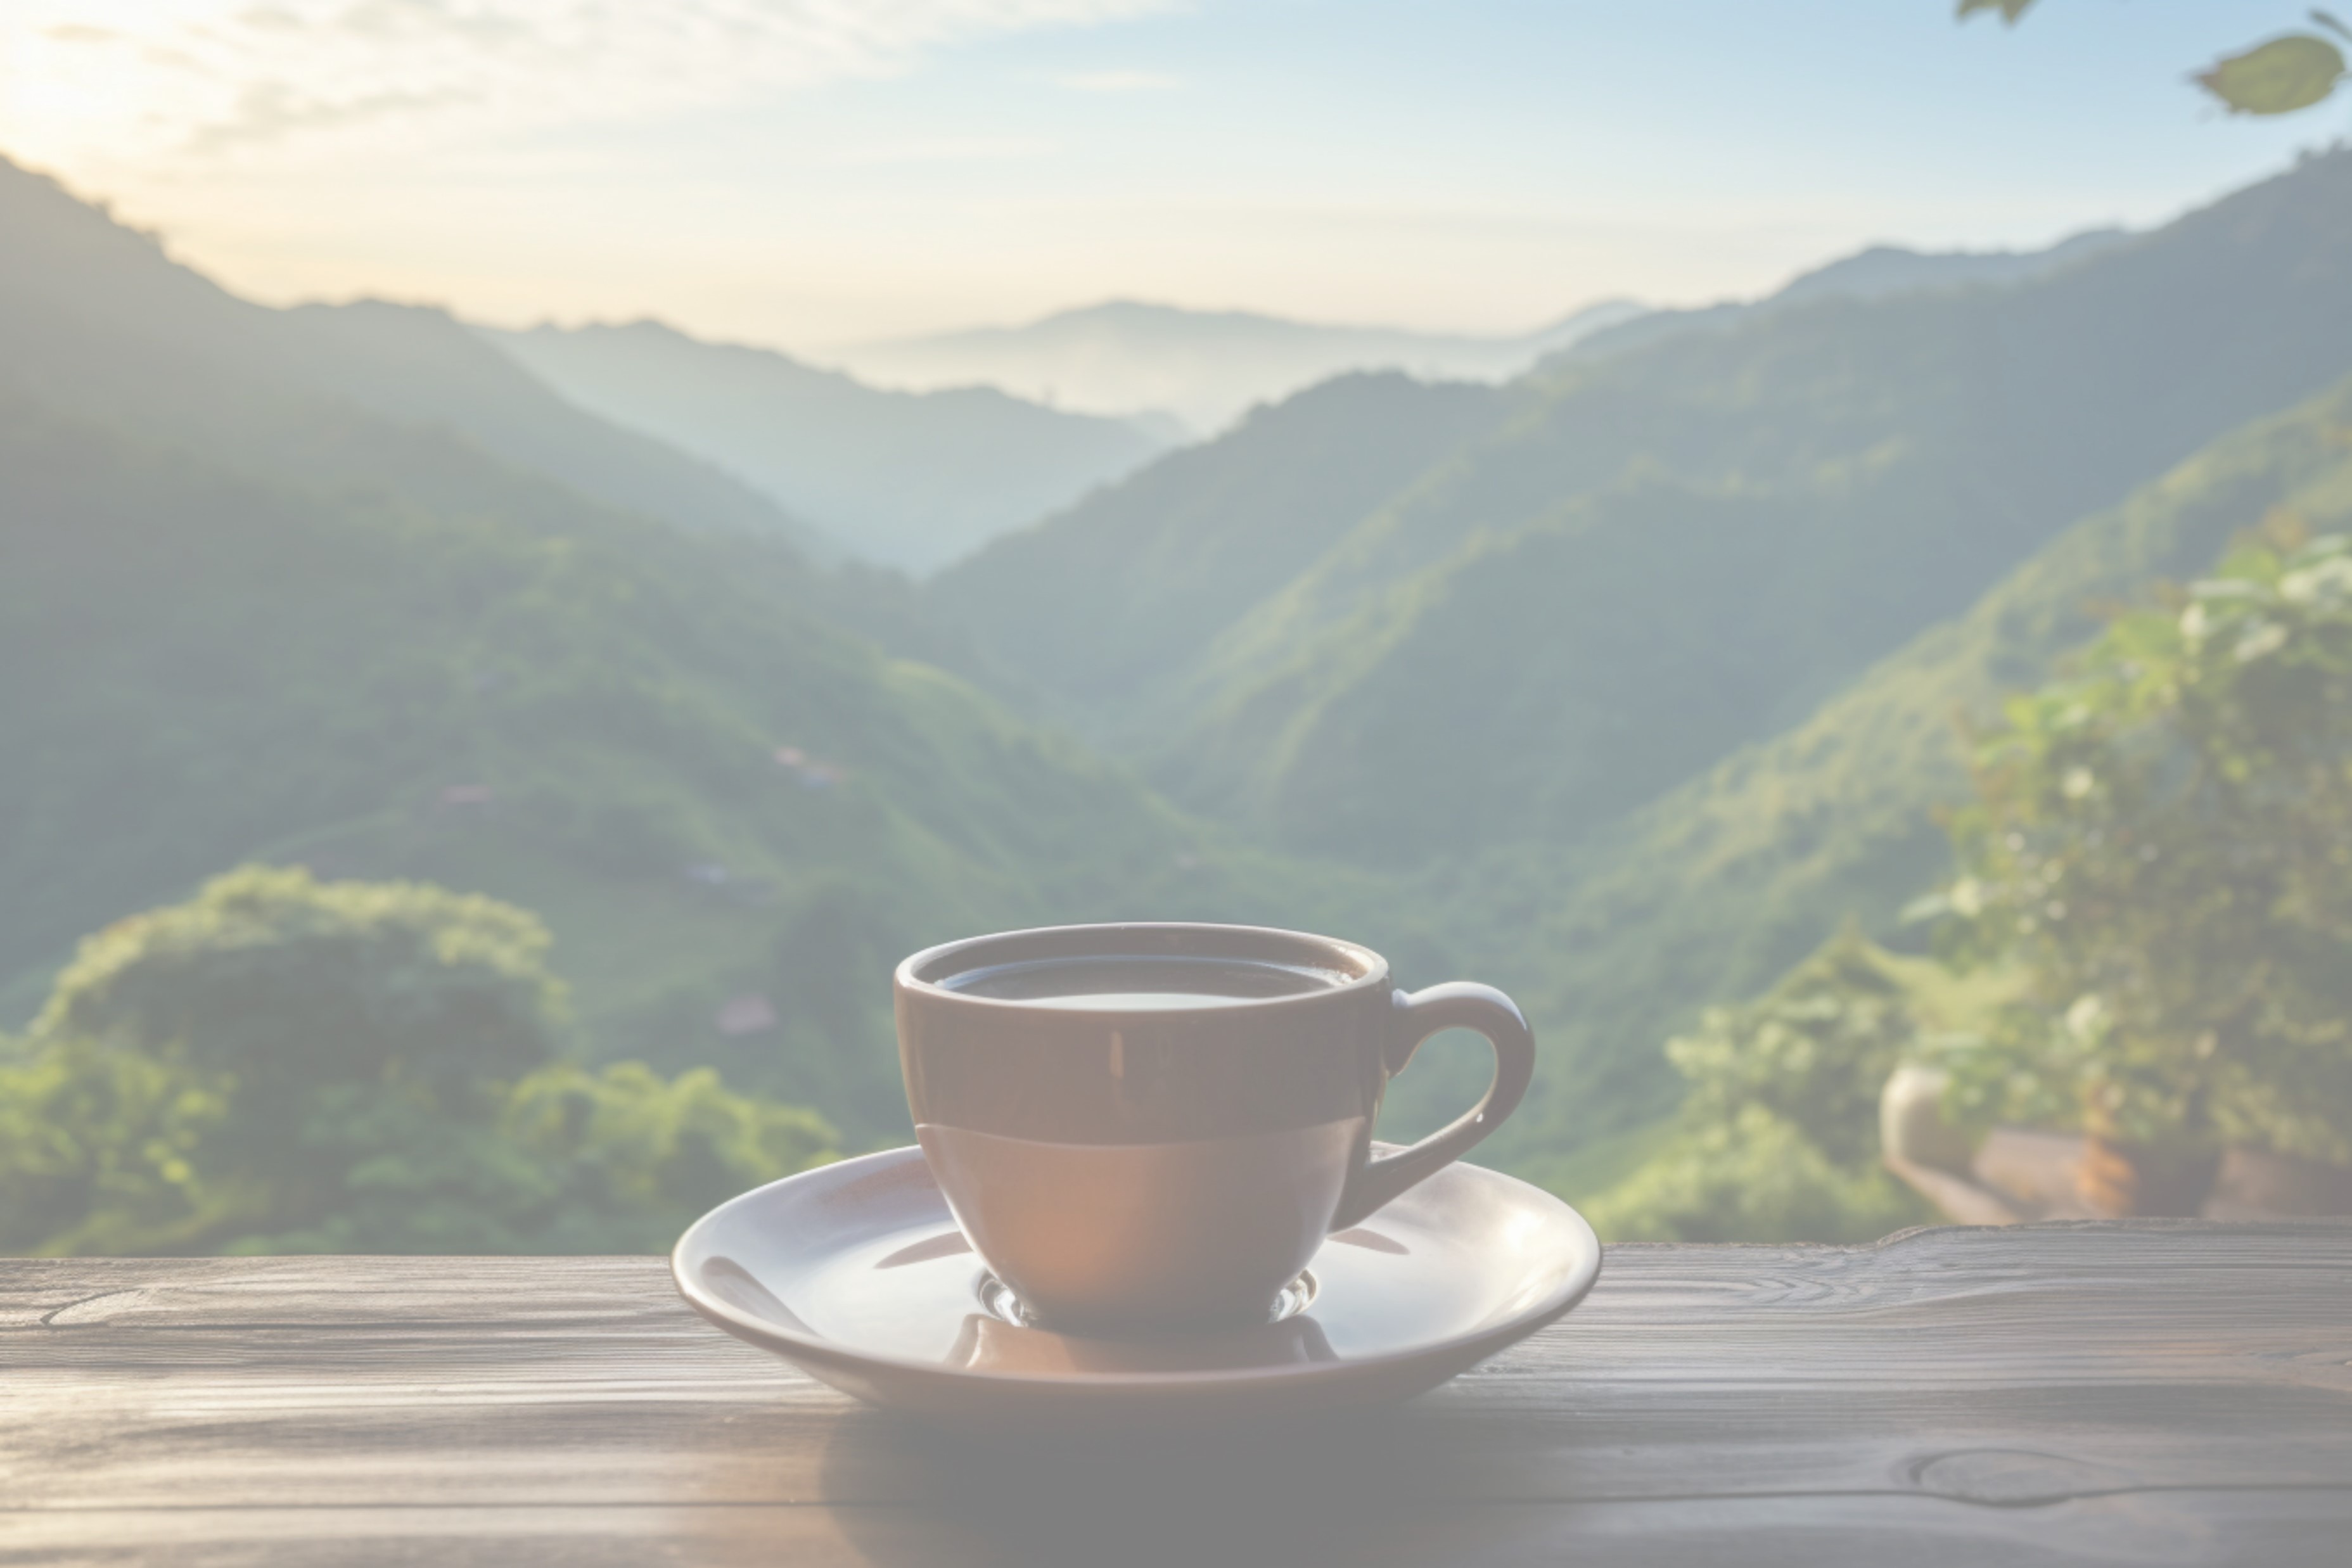 Coffee with a view cup on a wooden table overlooking mountains